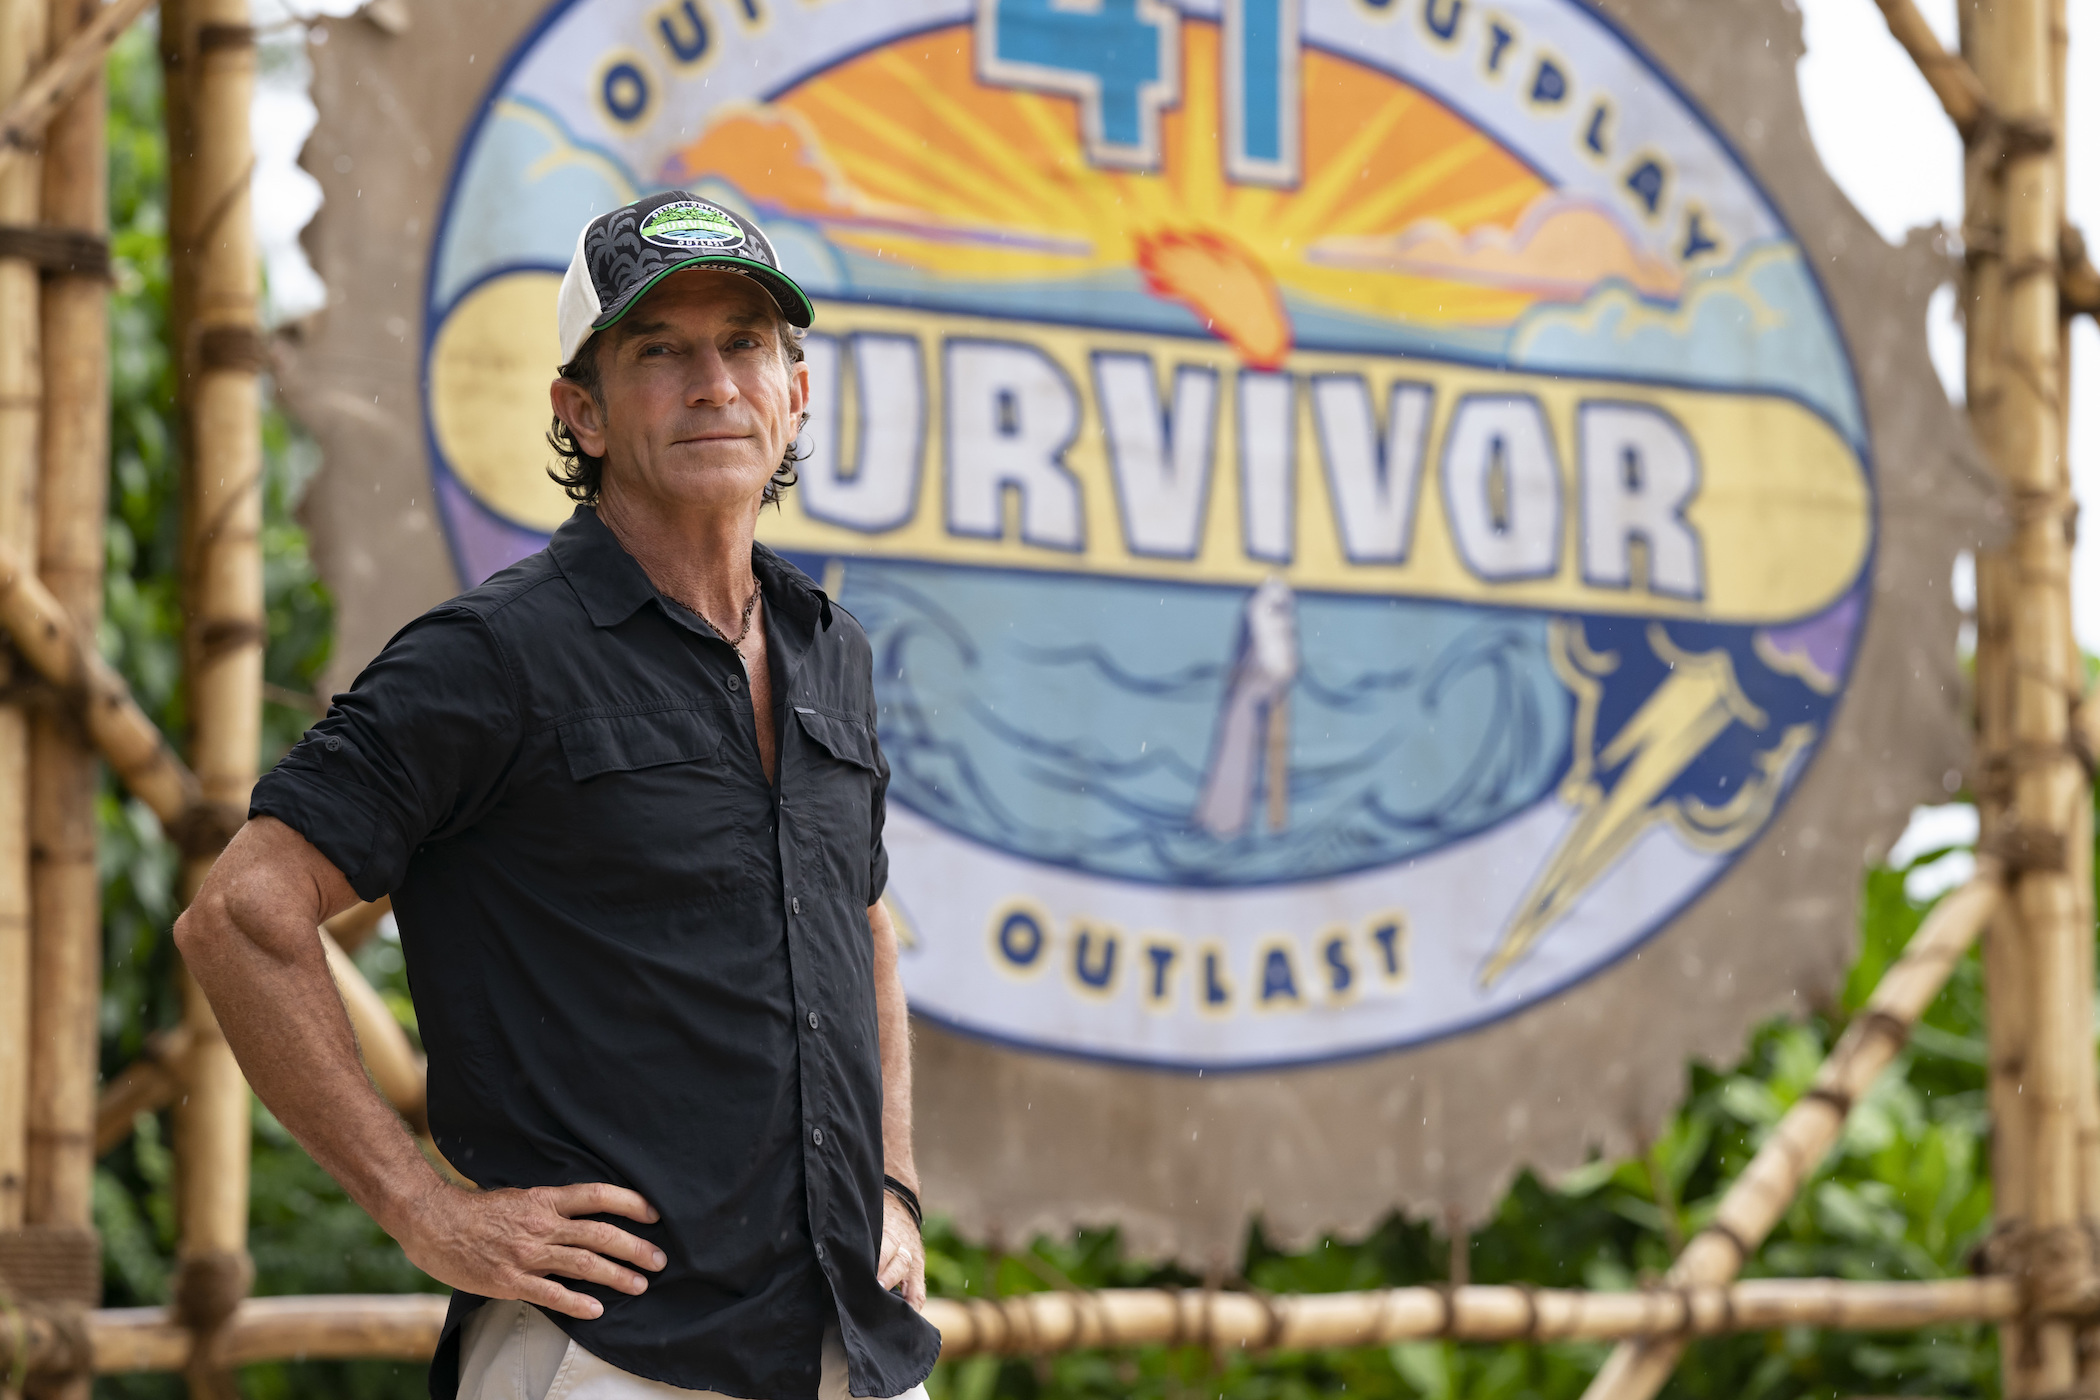 Jeff Probst in front of a sign for 'Survivor' Season 41. Jeff Probst will return as the host for 'Survivor' Season 42